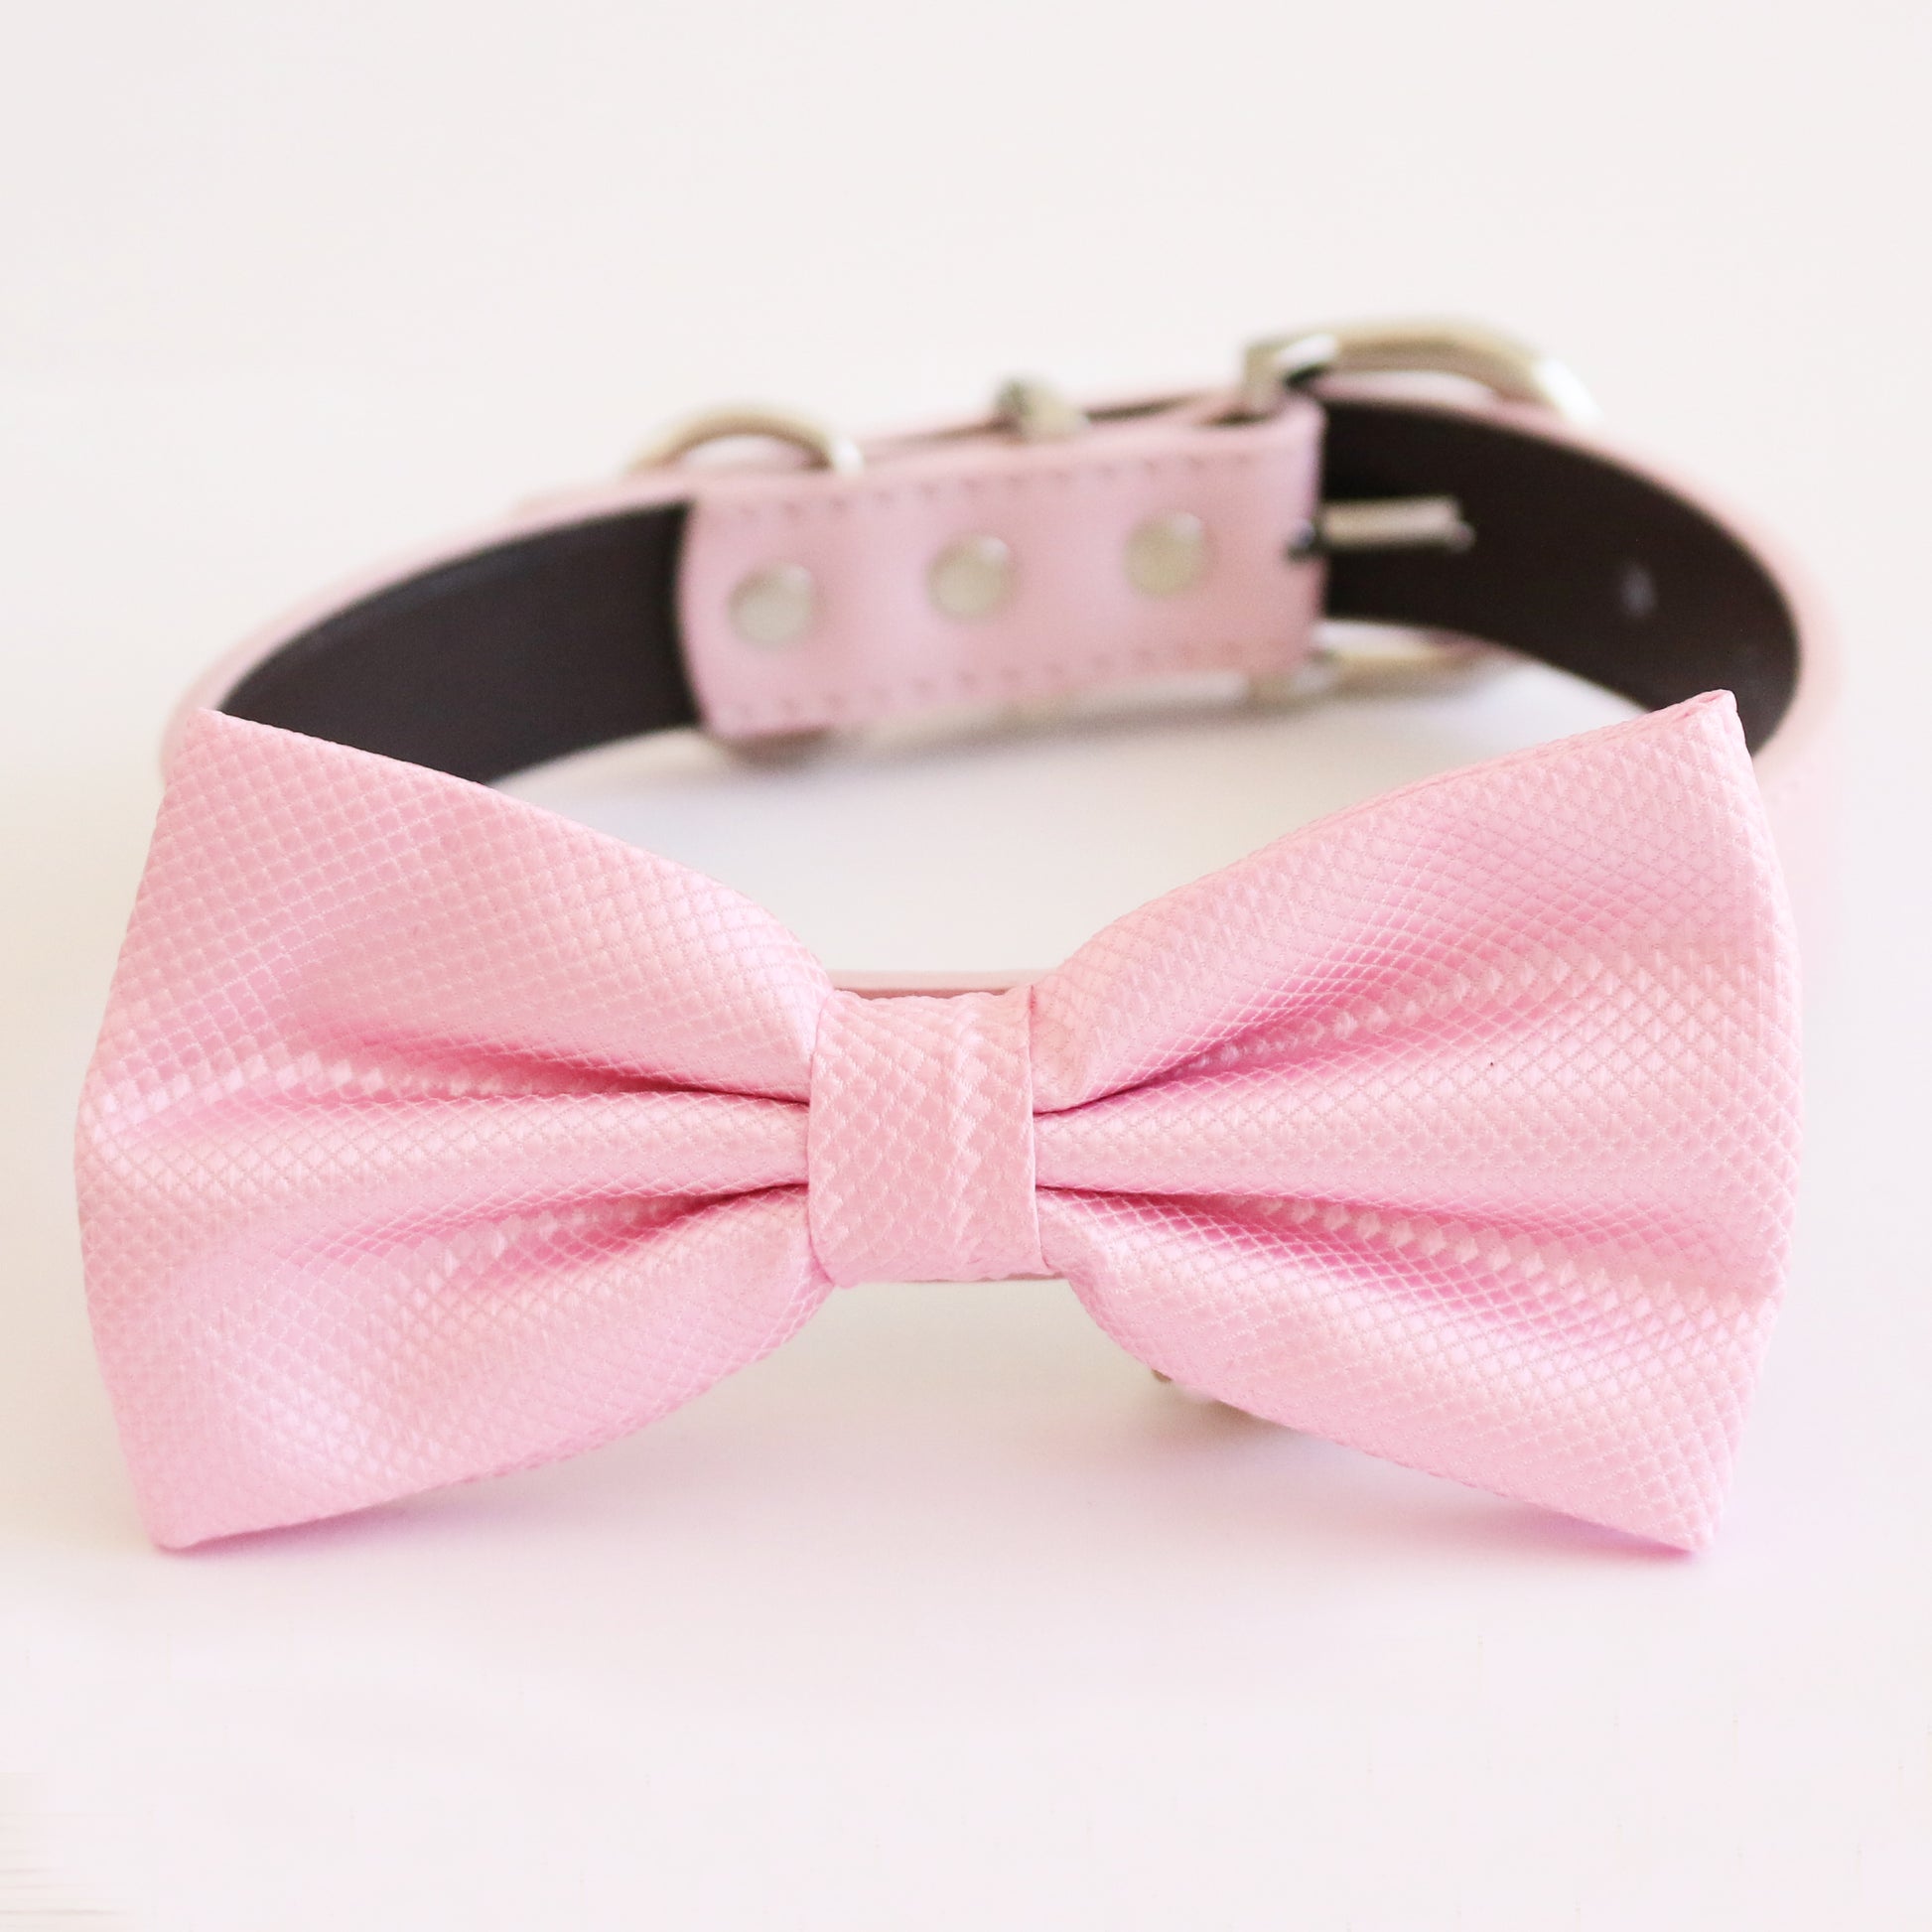 Extra-small pet collar in pastel pink